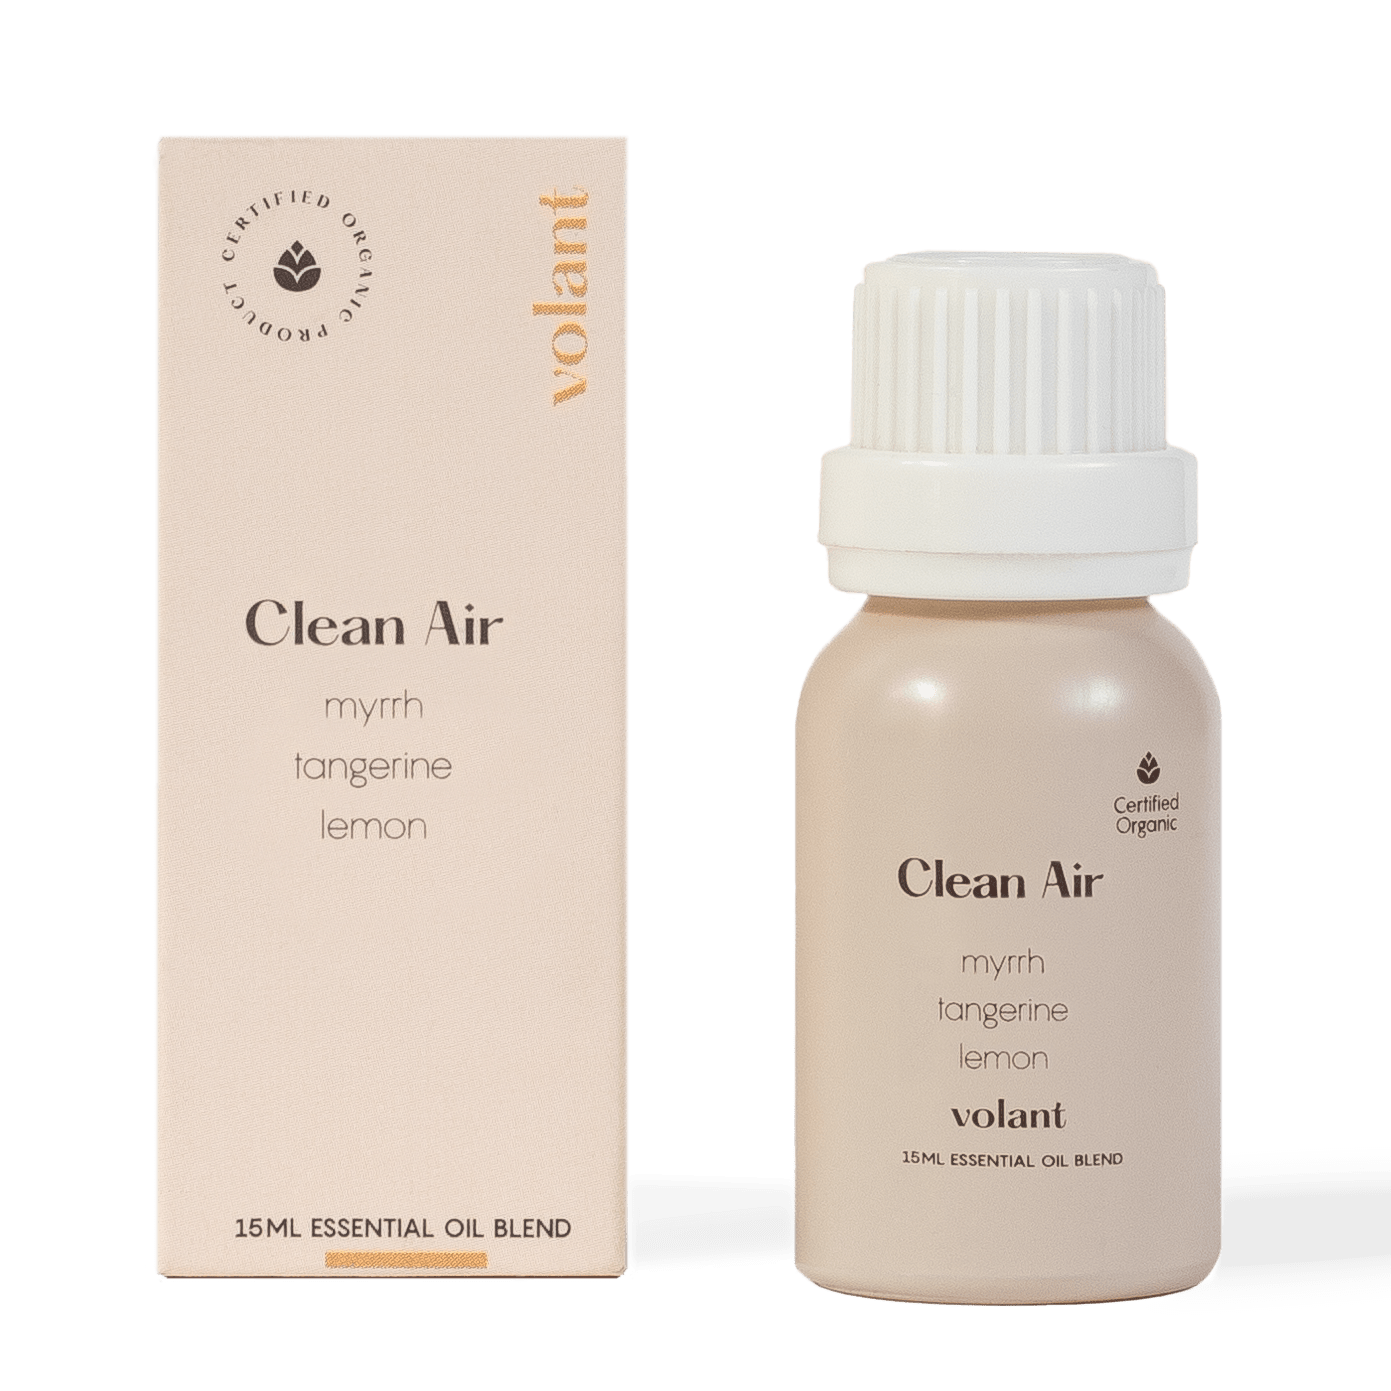 volant clean air essential oil blend bottle packaging made with pure Lemon, Myrrh, and Tangerine